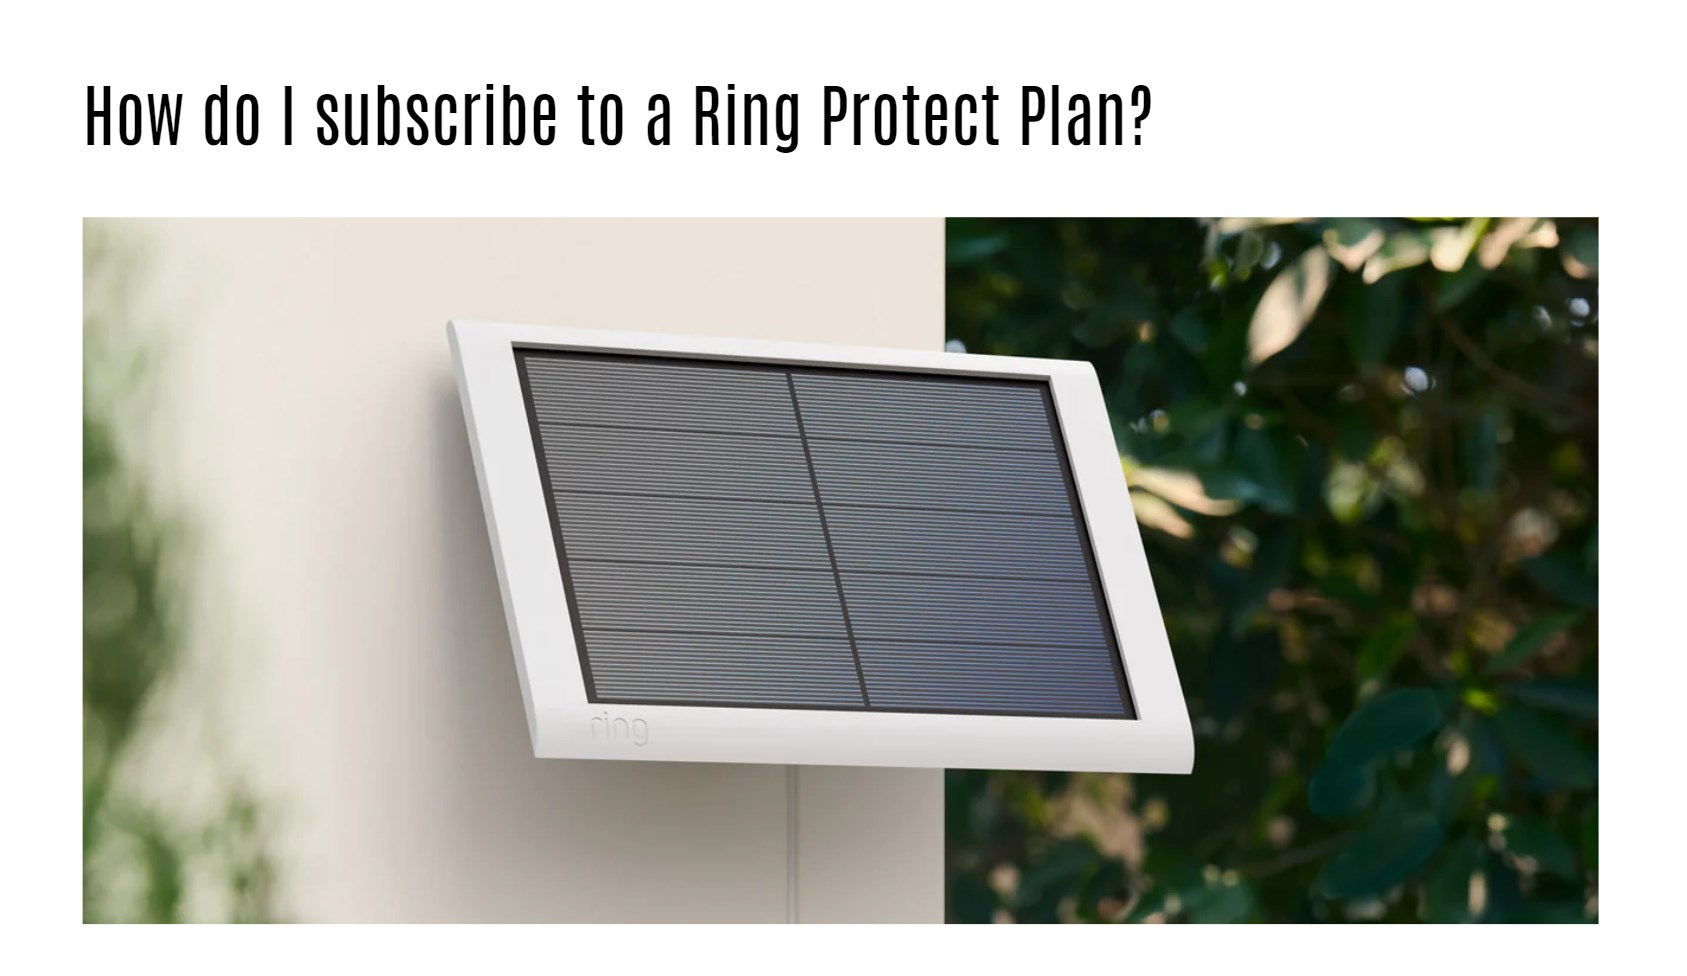 How do I subscribe to a Ring Protect Plan?